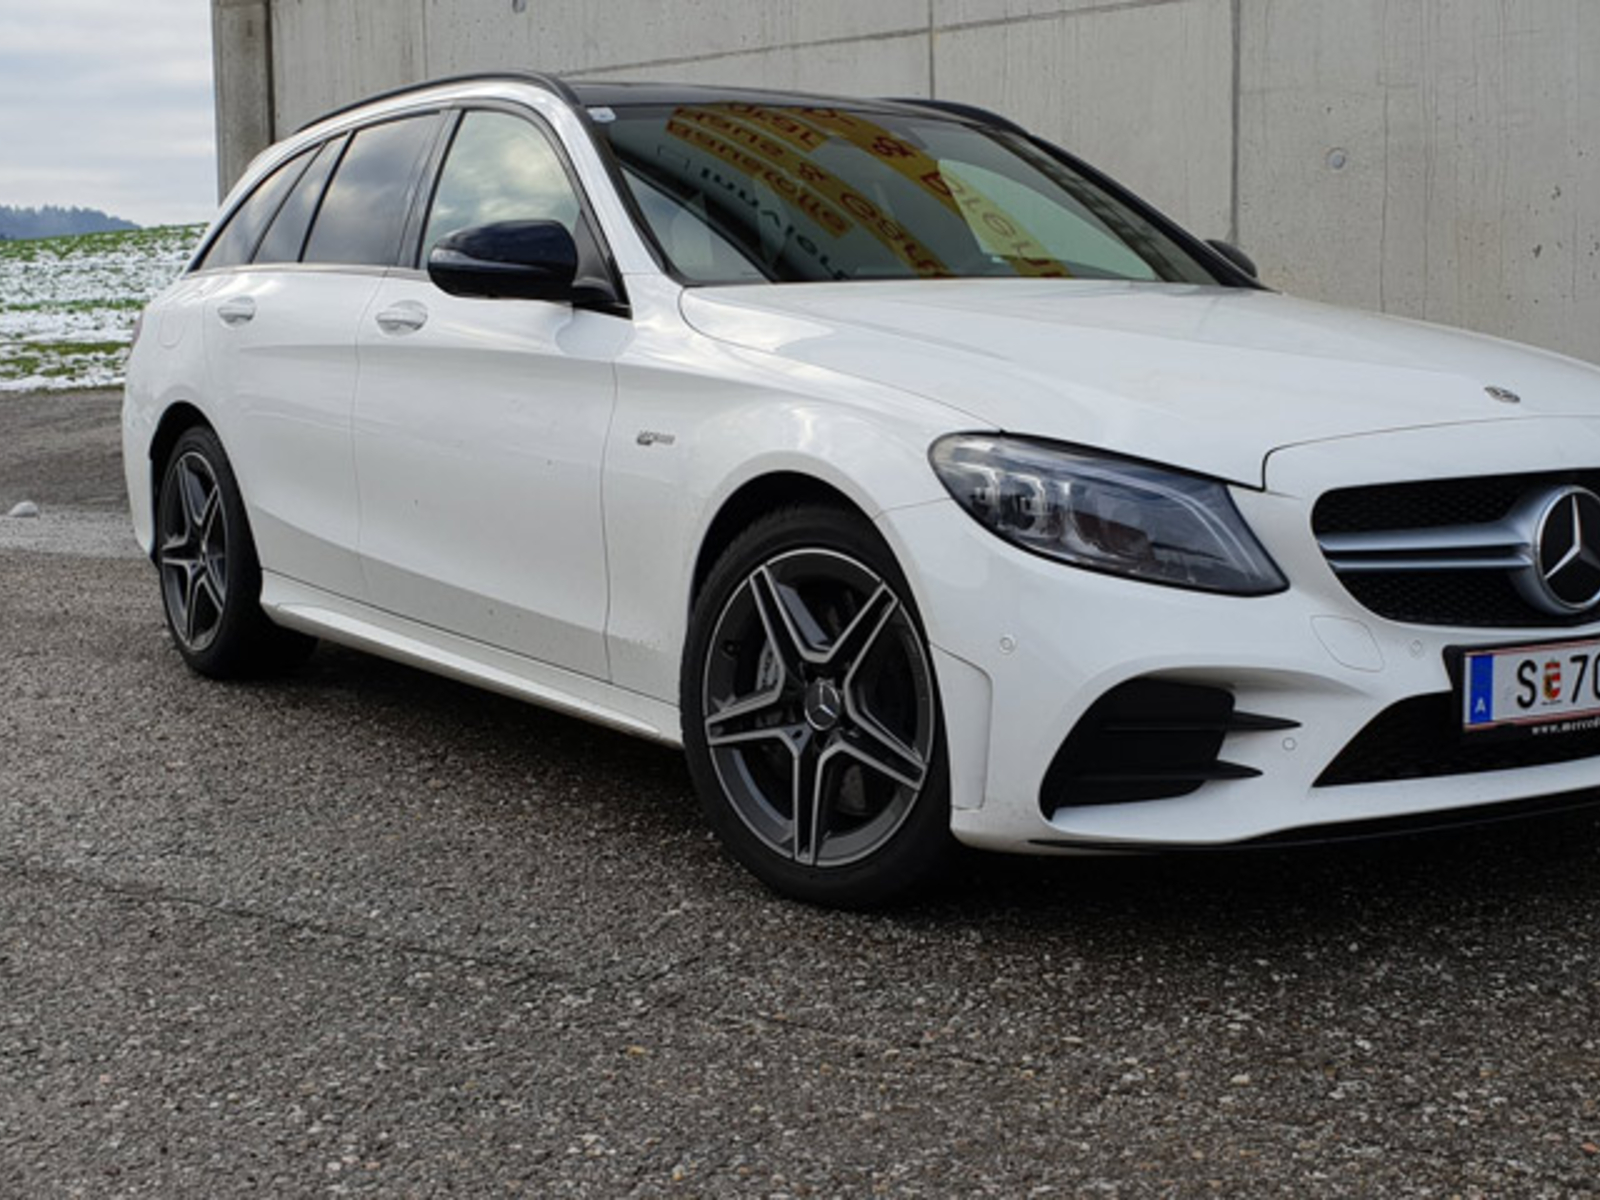 Mercedes-AMG C43 T-Modell im Test - oe24.at